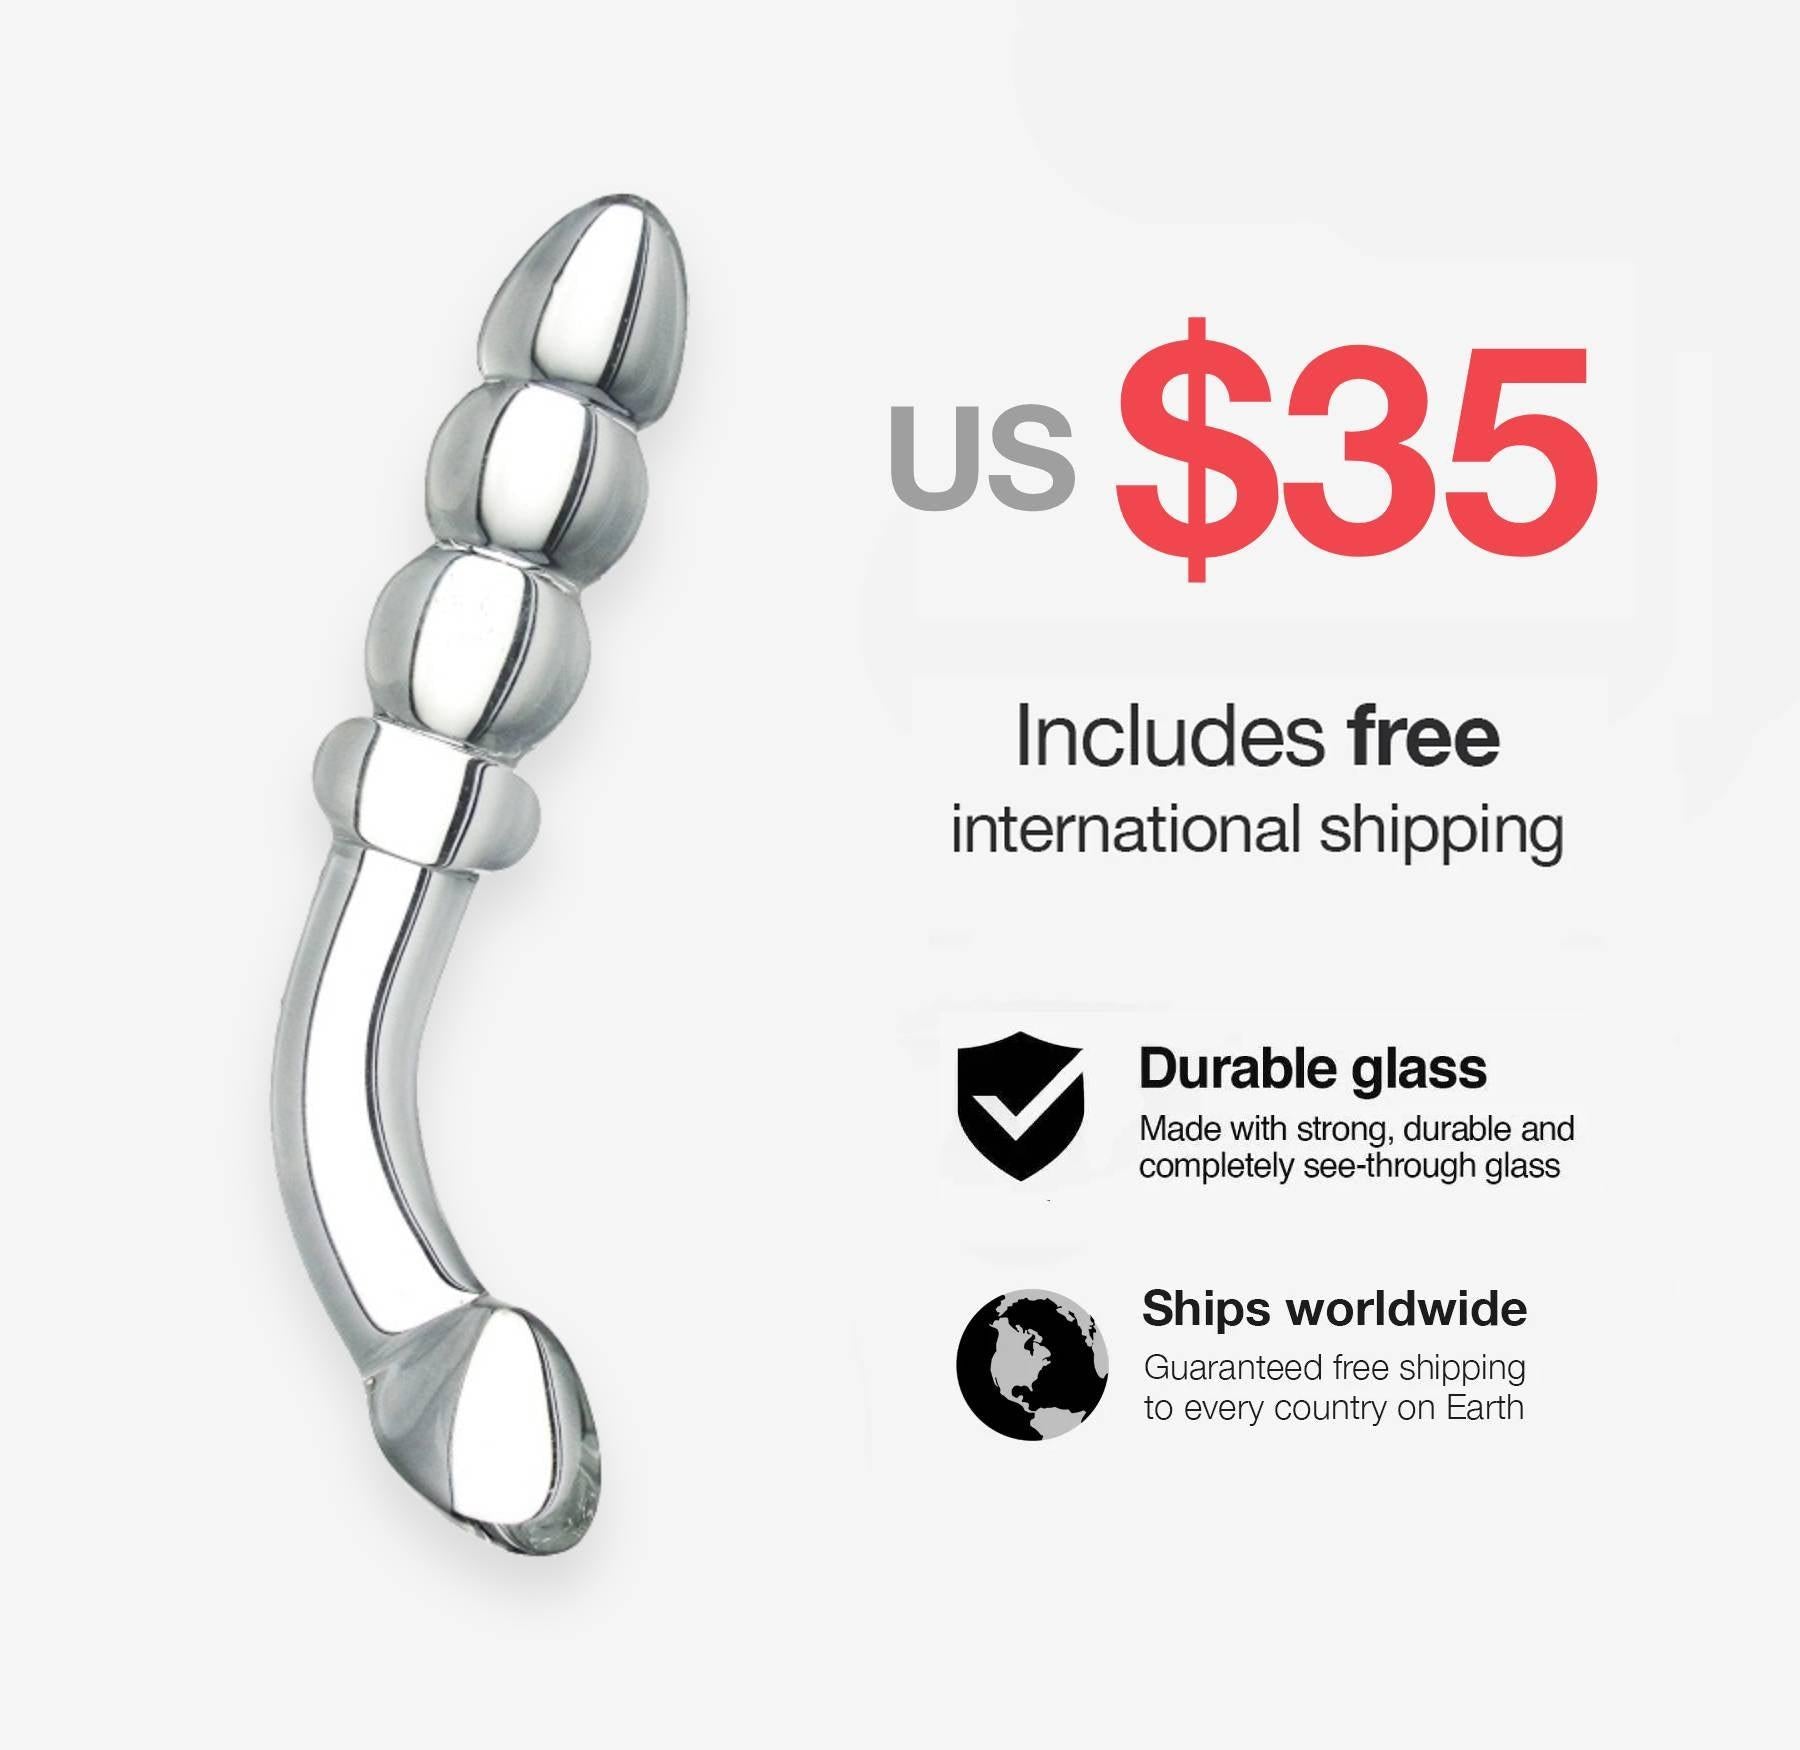 7.7 Inch Curved Glass Dildo - Gays+ Store